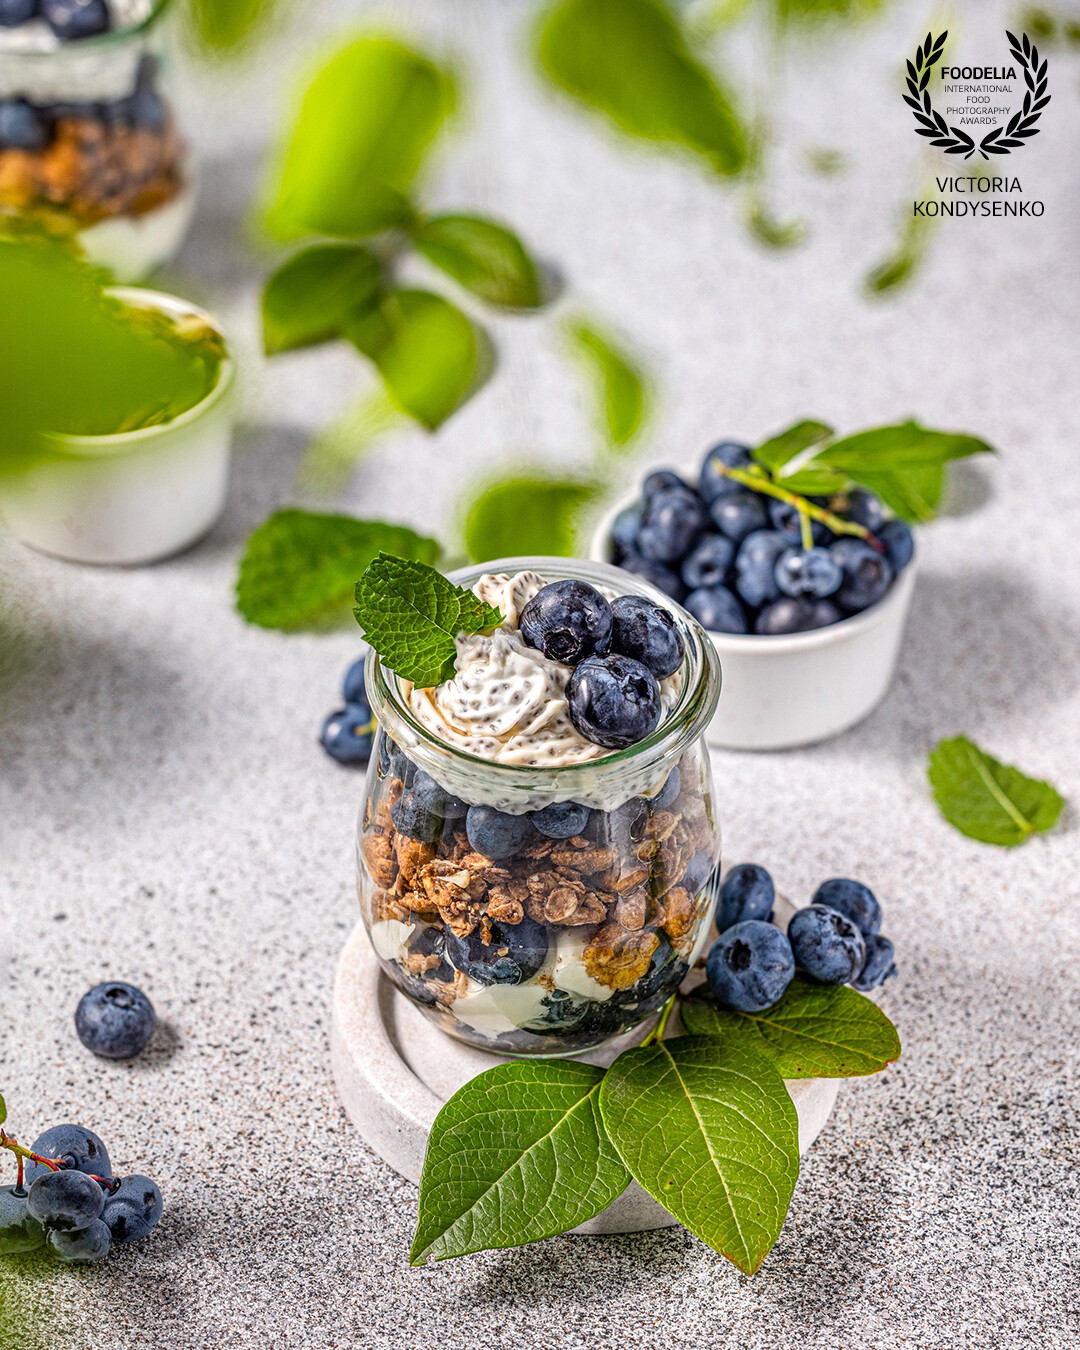 Homemade granola with Greek yogurt, maple syrup and fresh blackberries and blueberries in glasses. Promotional photo shoot of the local Ukrainian family cafe.